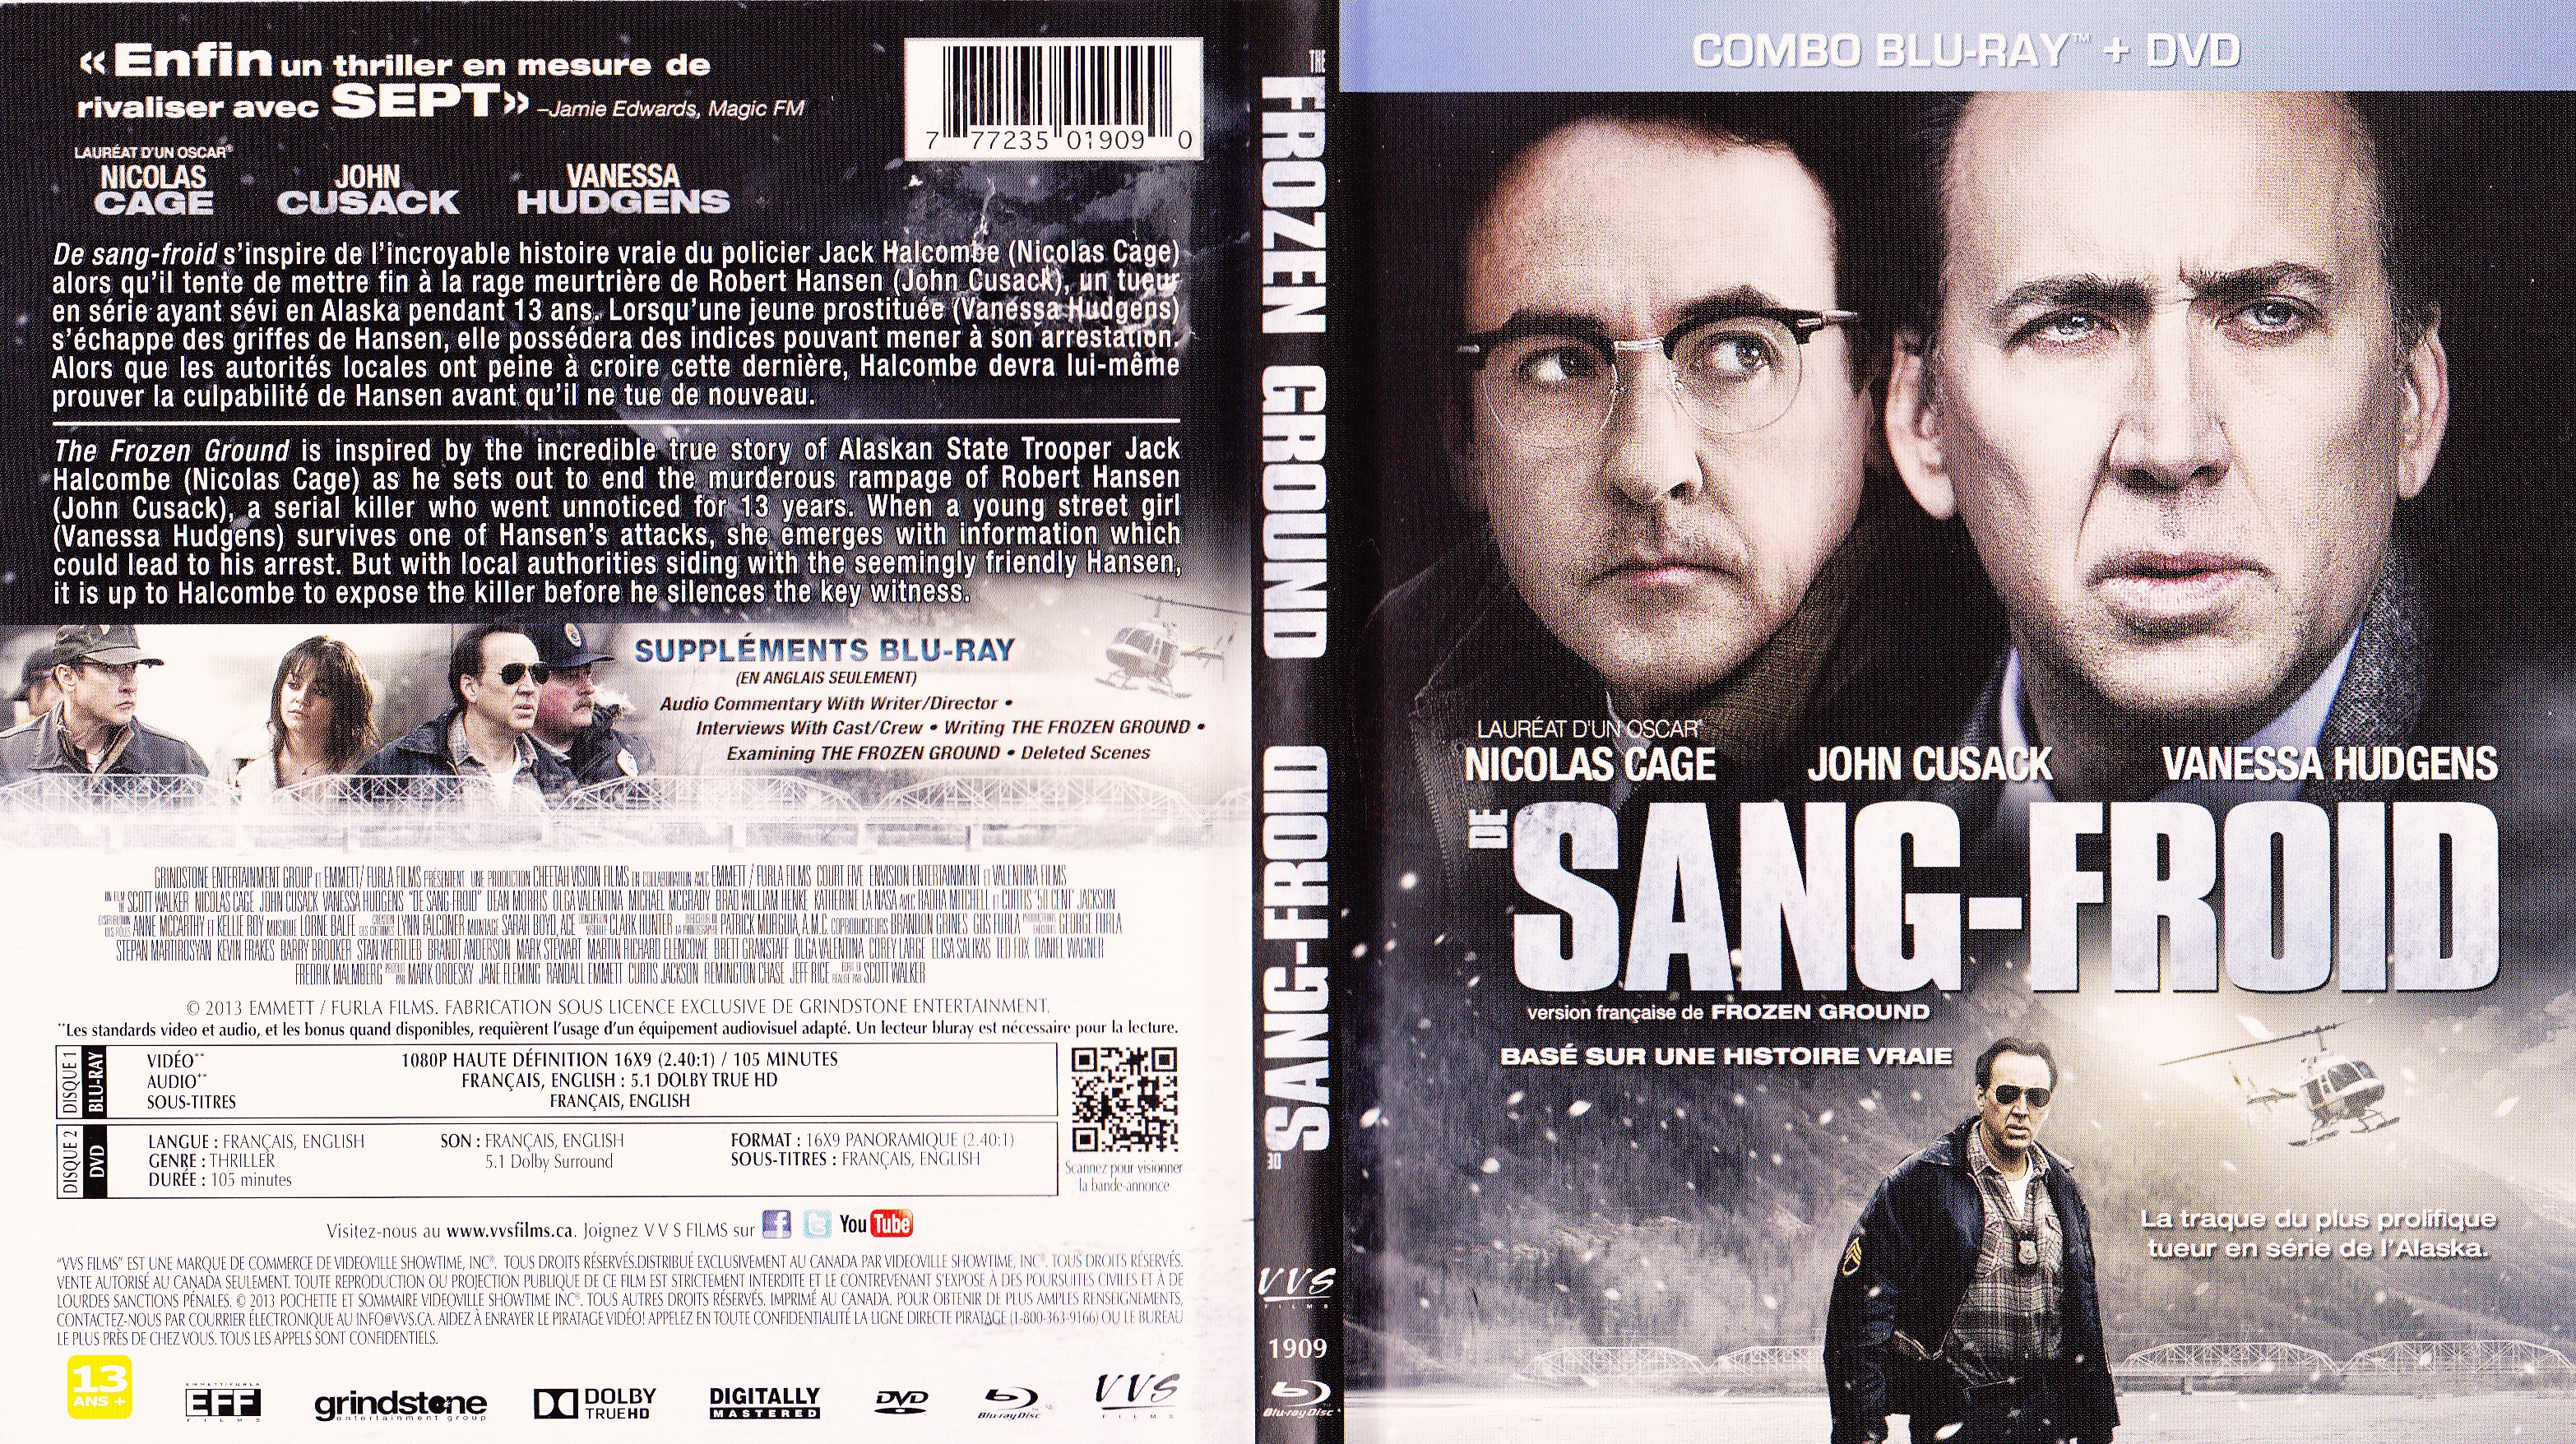 Jaquette DVD Sang- Froid - Frozen Ground (Canadienne)